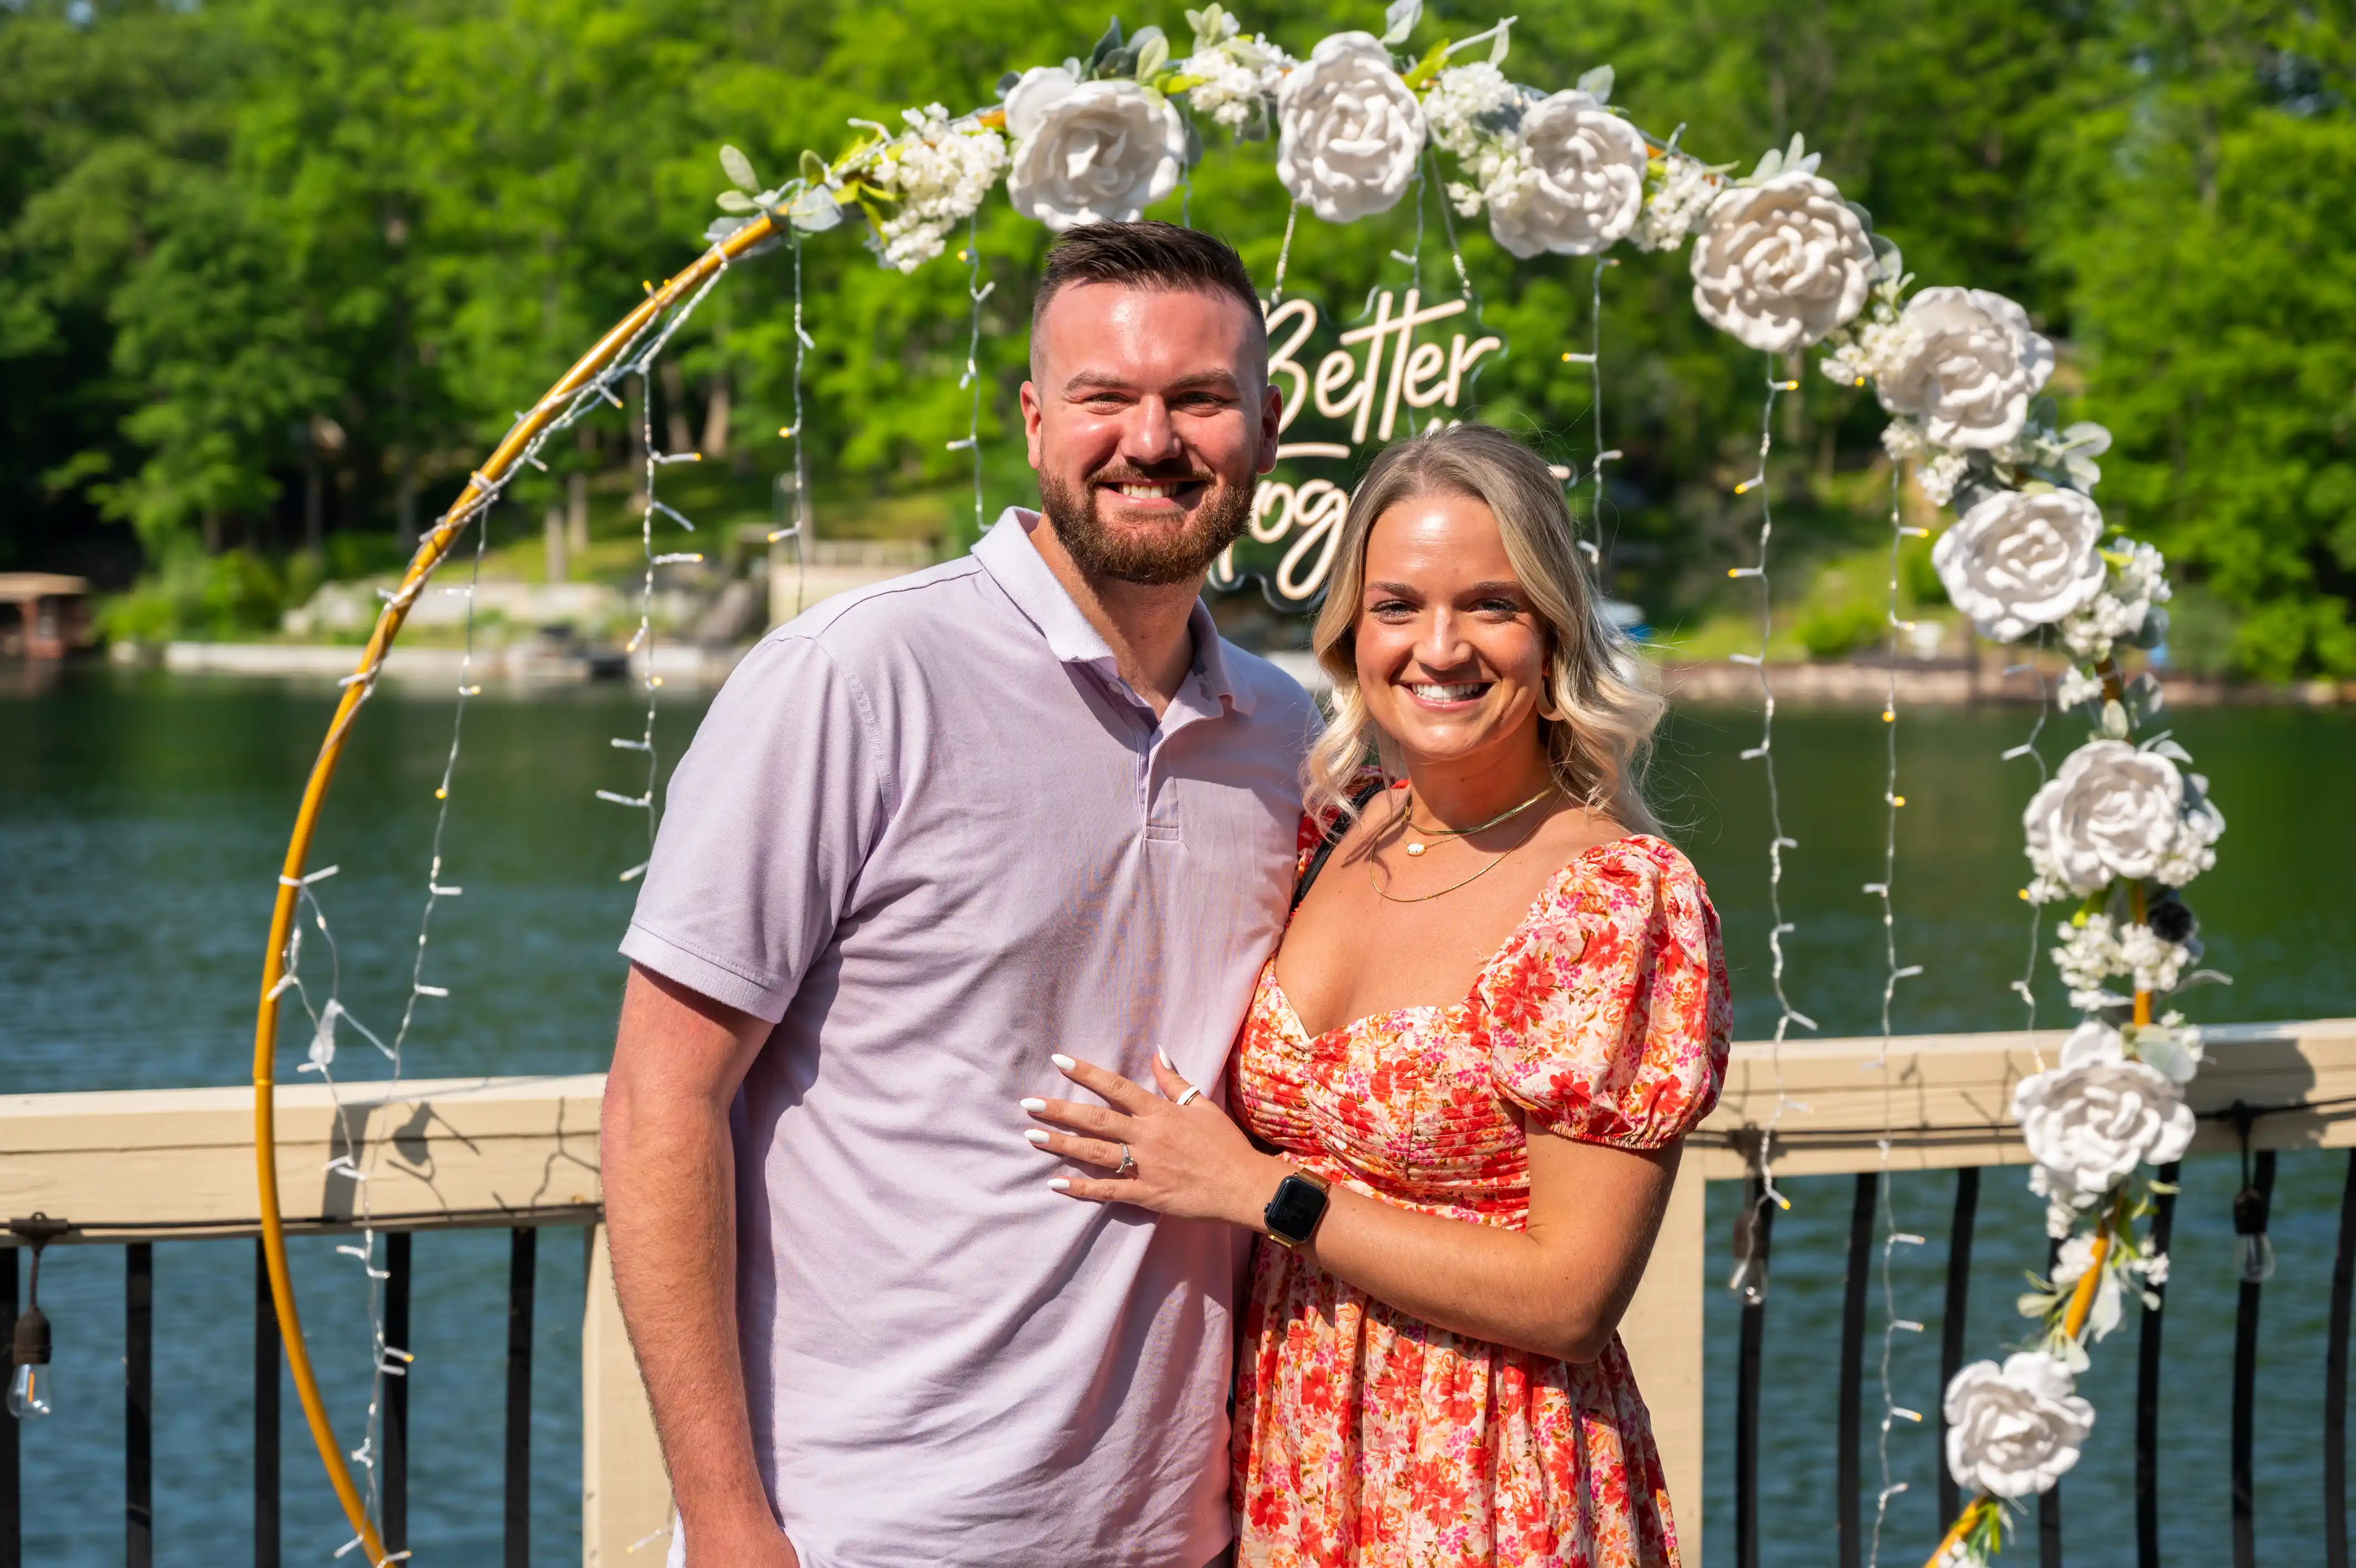 A smiling couple embracing in front of a floral arch with the words "better together" on a lakeside deck, indicative of a celebration or special event.